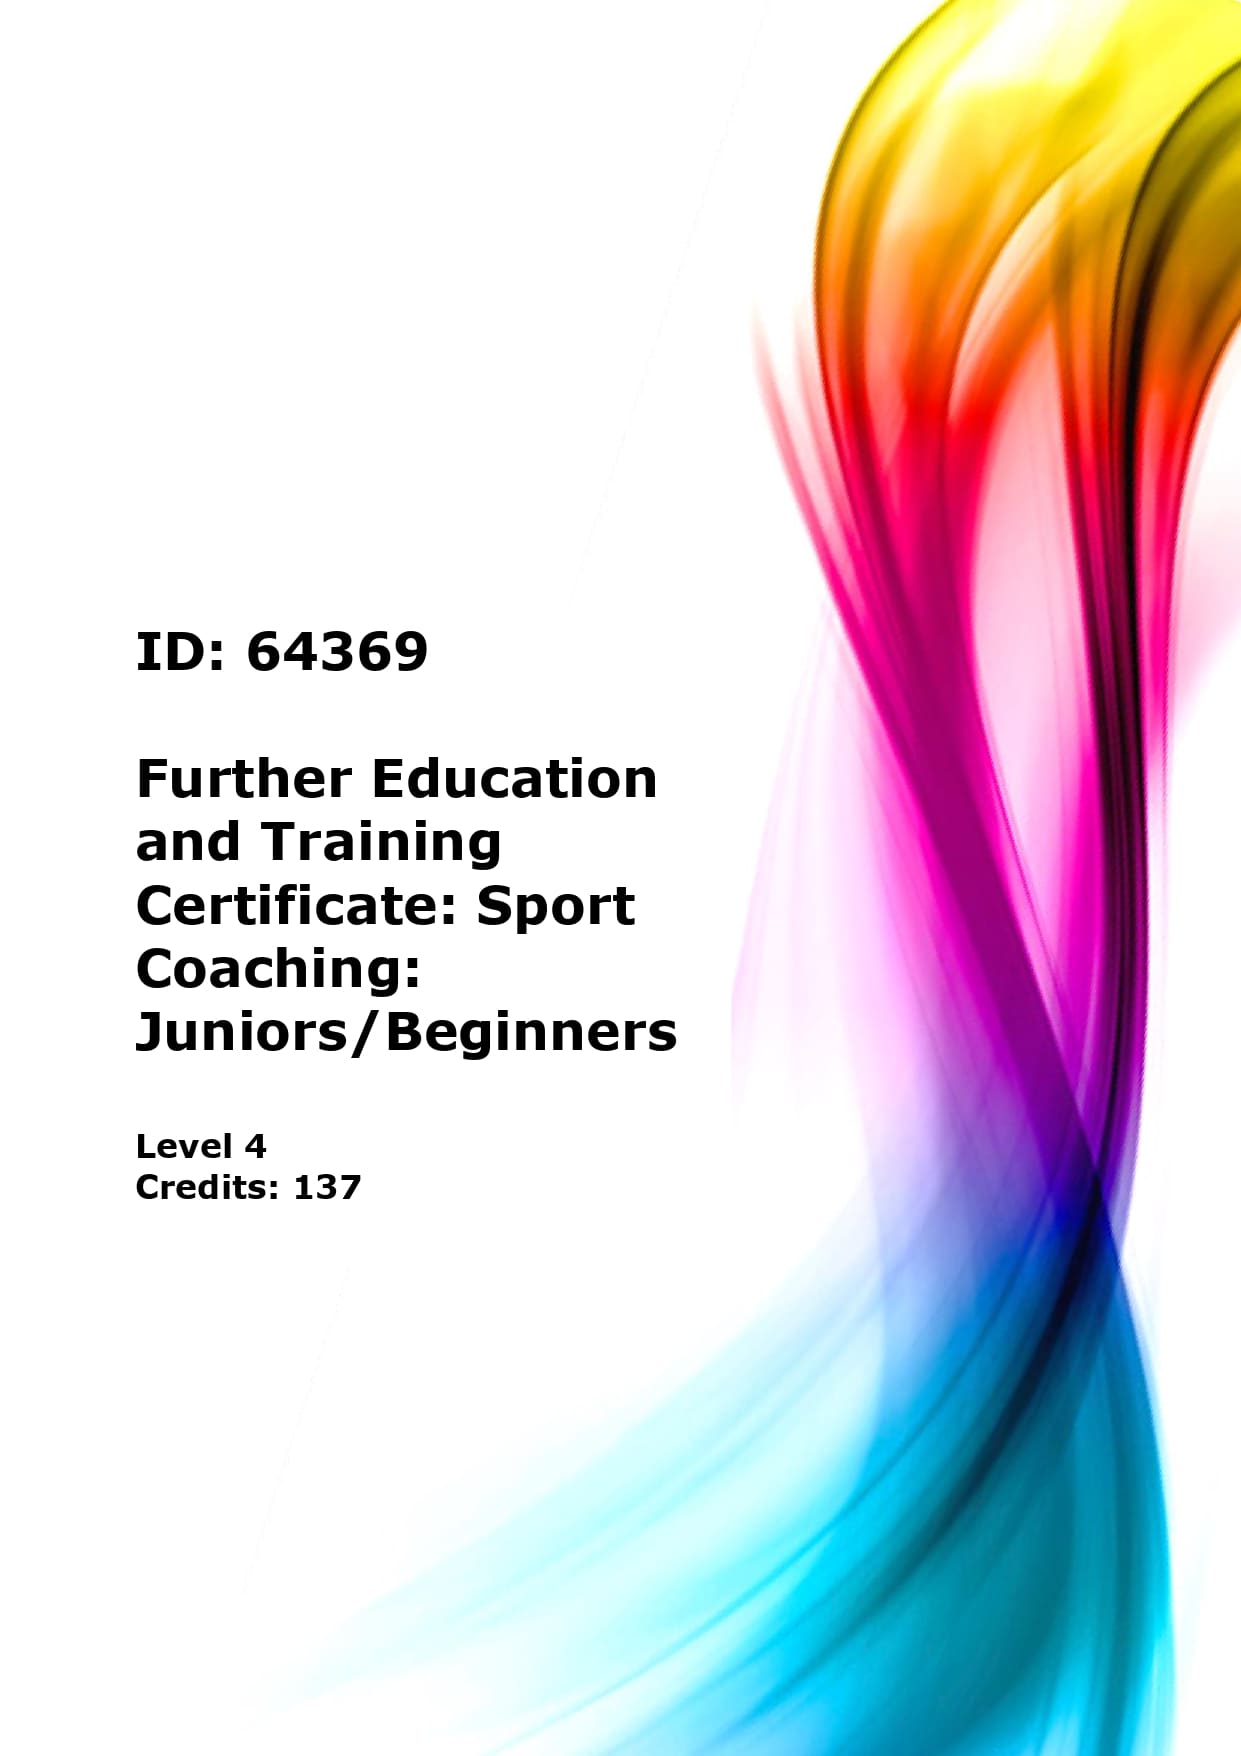 Further Education and Training Certificate: Sport Coaching: Juniors/Beginners